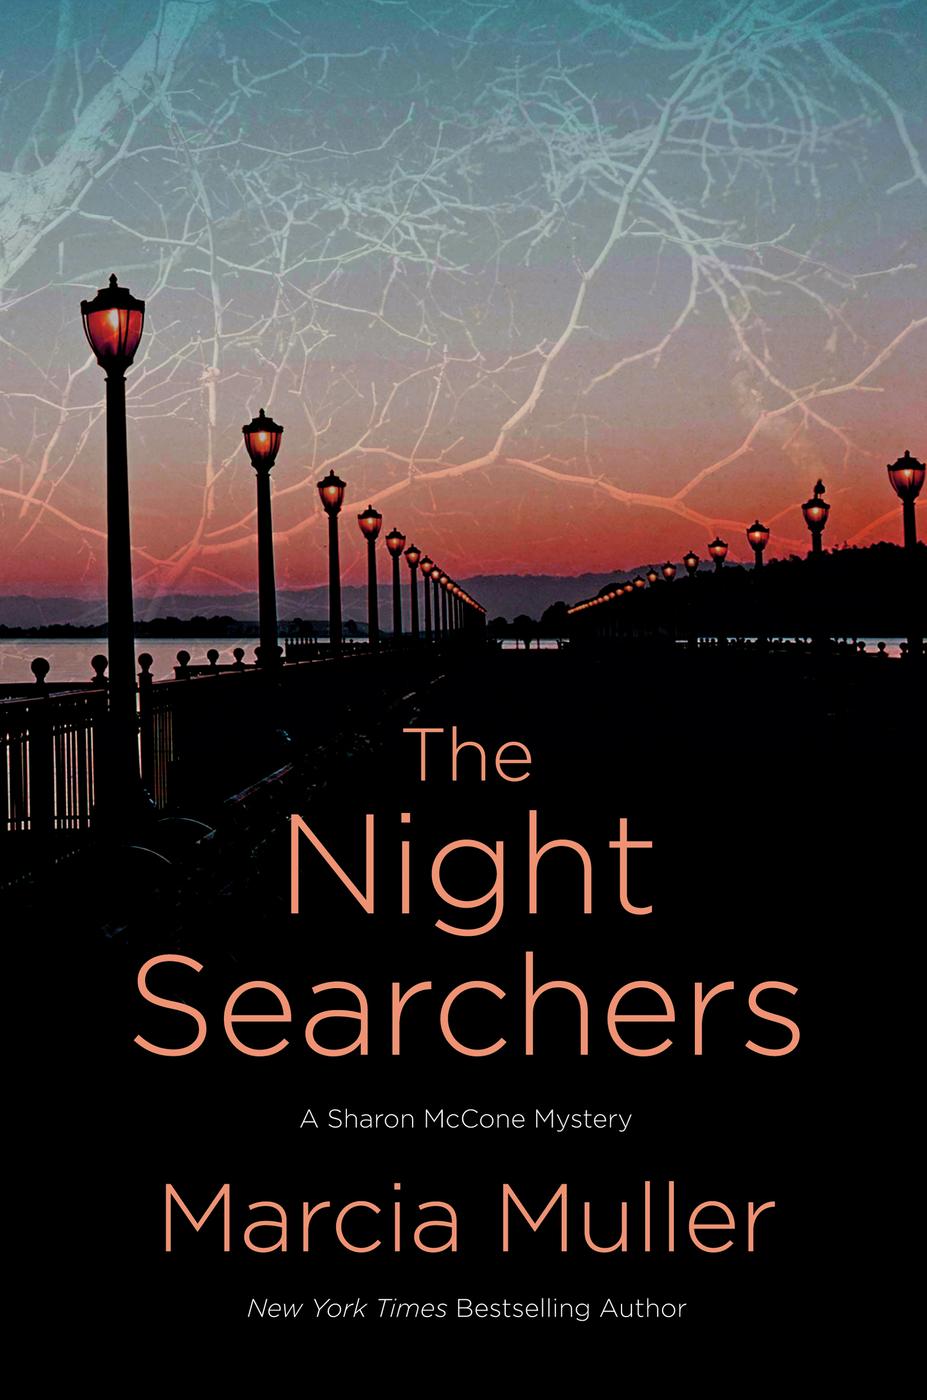 The Night Searchers (A Sharon McCone Mystery) by Marcia Muller